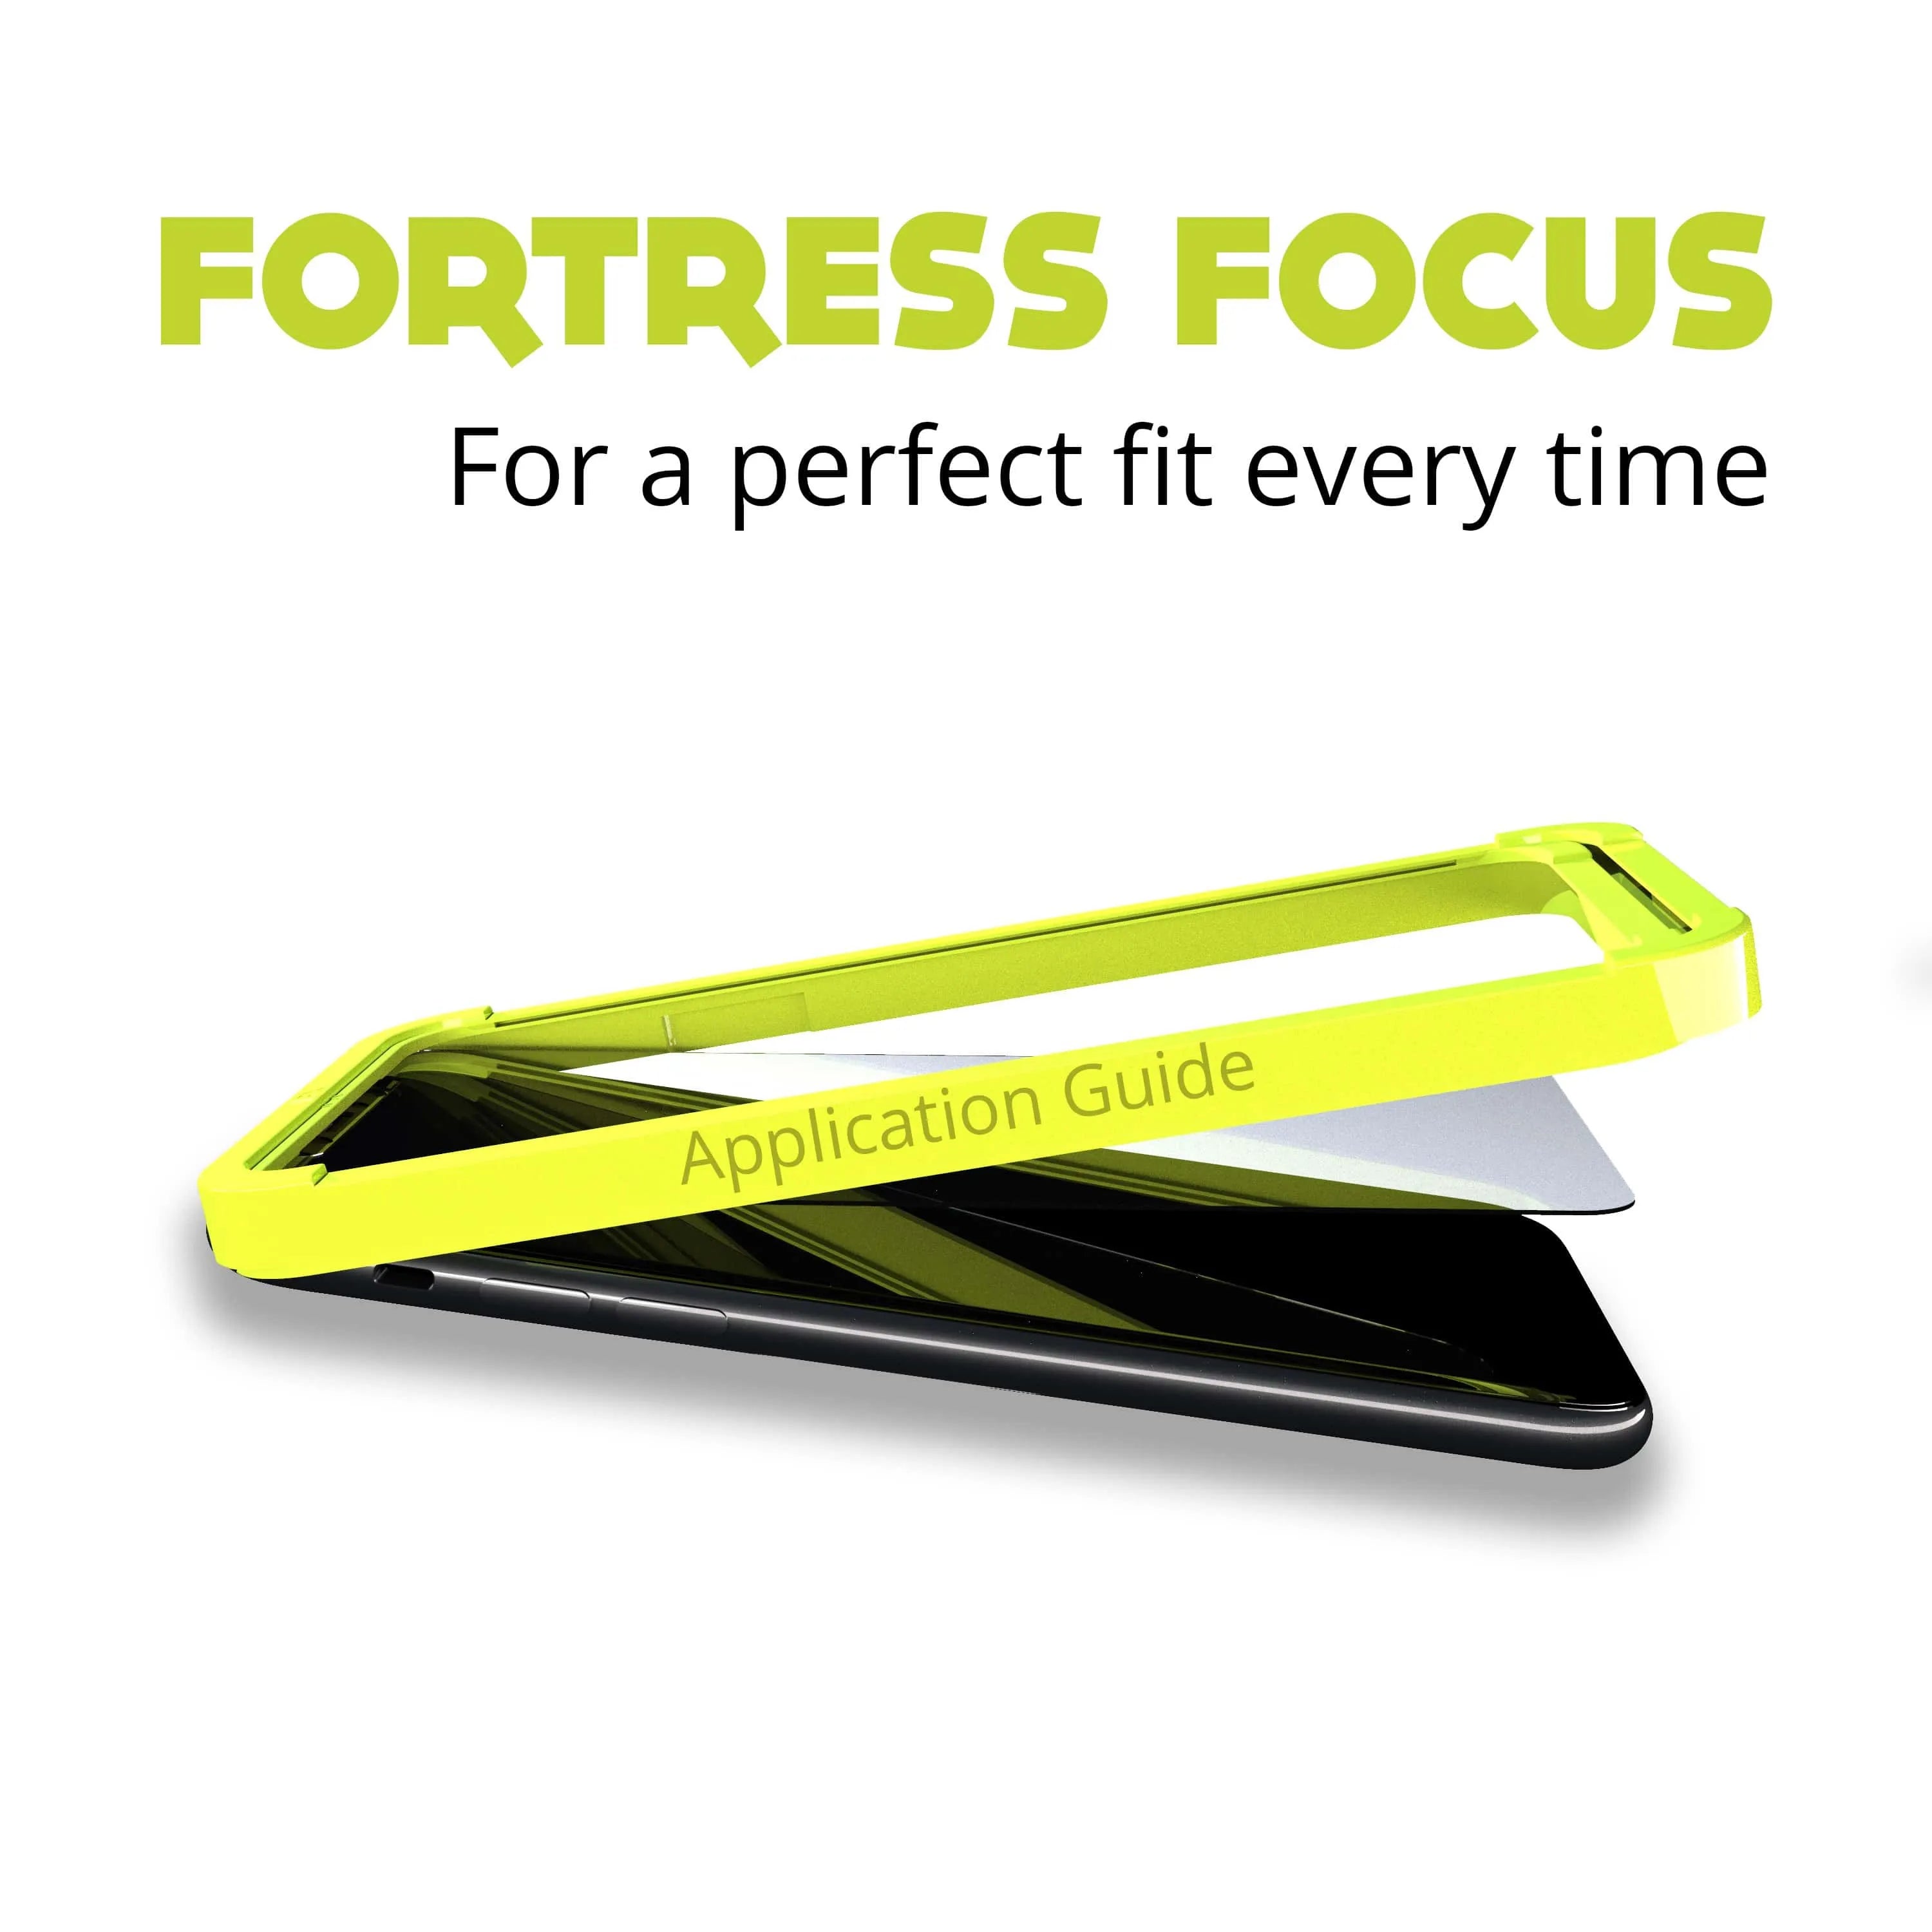 Fortress iPhone XS Max Screen Protector - $200 Device Coverage  Scooch Screen Protector